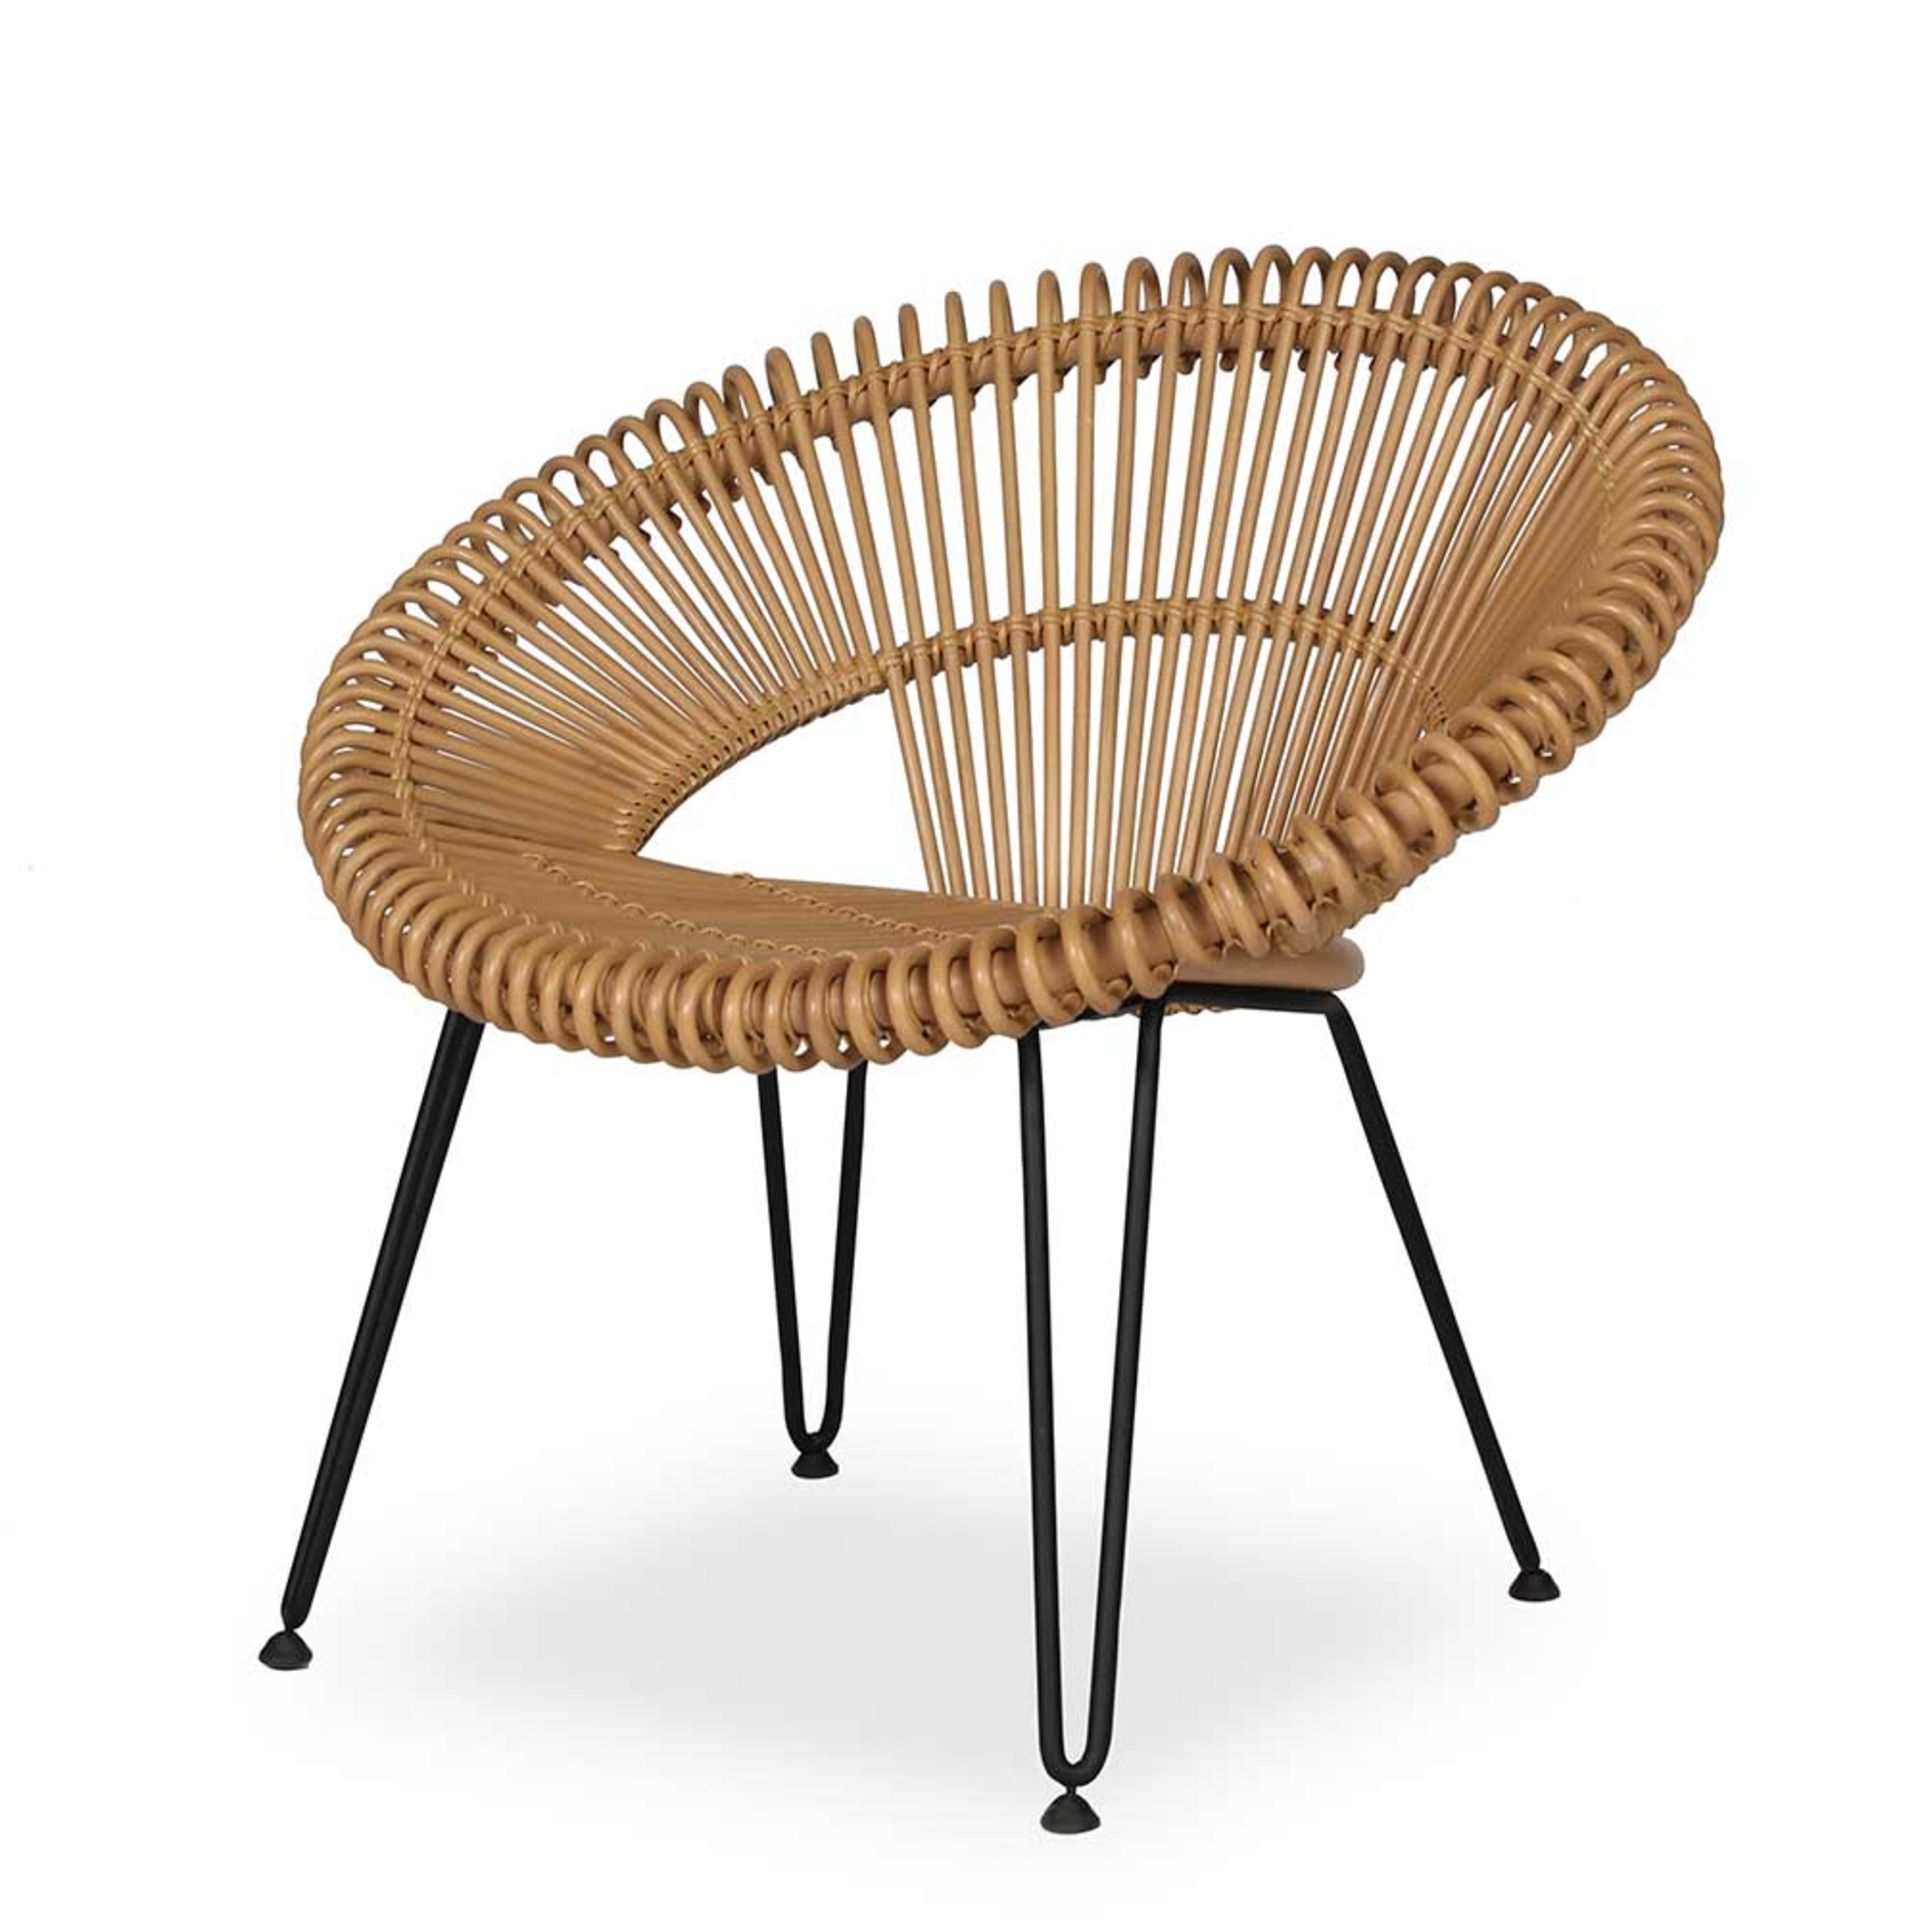 1 x Cruz Lazy Chair By Vincent Shepherd - Natural Rattan - For Contemporary Interiors - RRP £375!